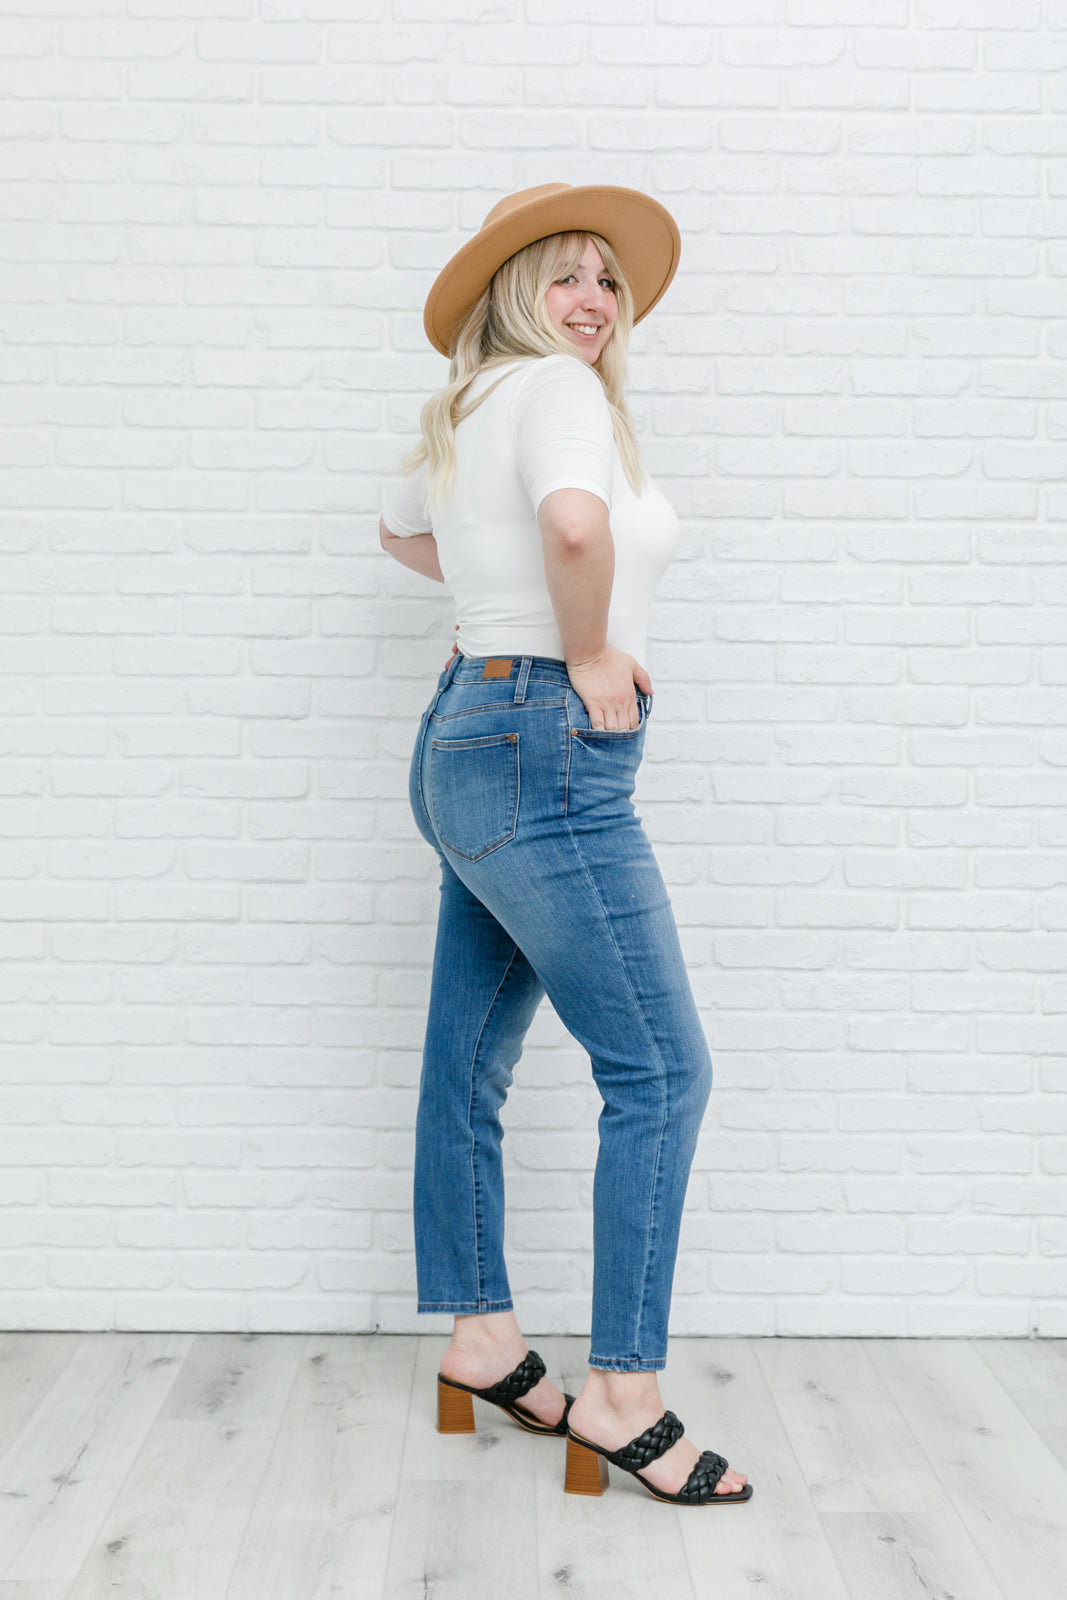 High Waist Slim Fit Jeans - Dixie Hike & Style